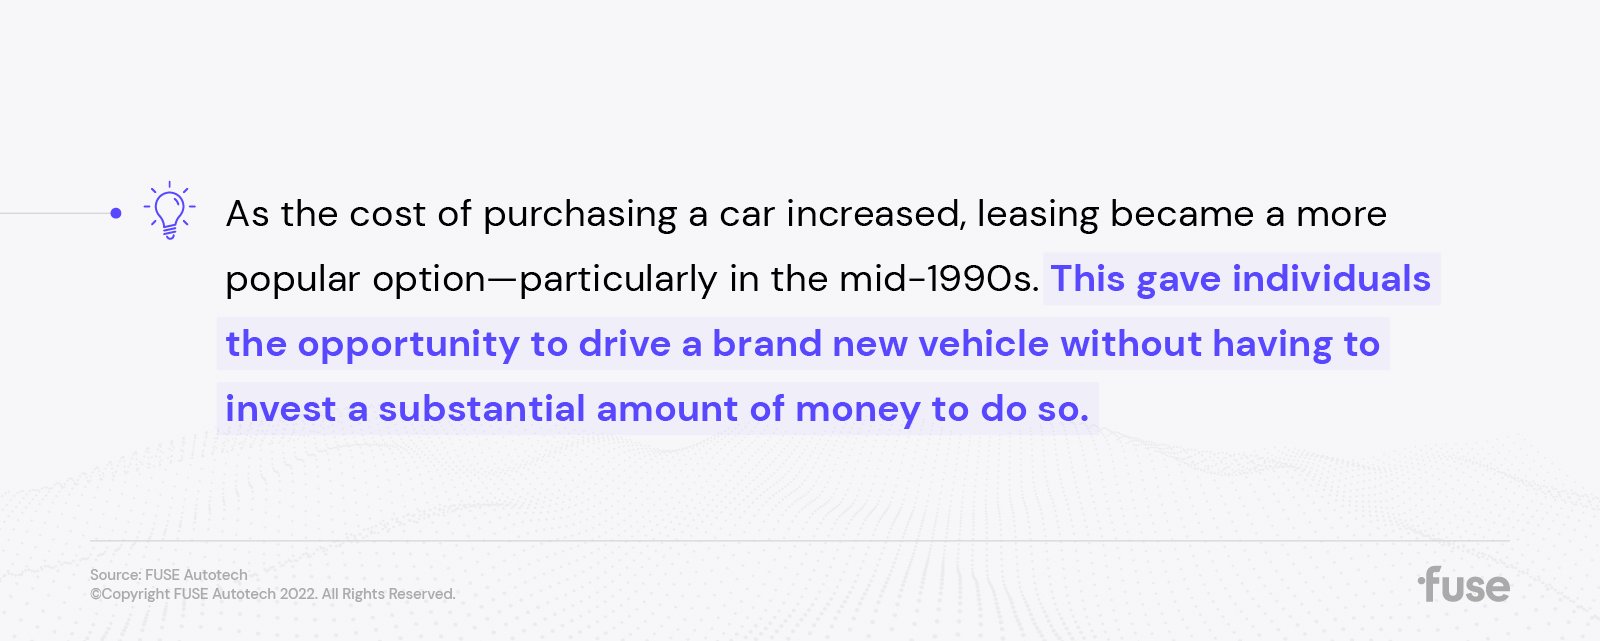 As the cost of purchasing a car increased, leasing became a more popular option—particularly in the mid-1990s. This gave individuals the opportunity to drive a brand new vehicle without having to invest a substantial amount of money to do so.